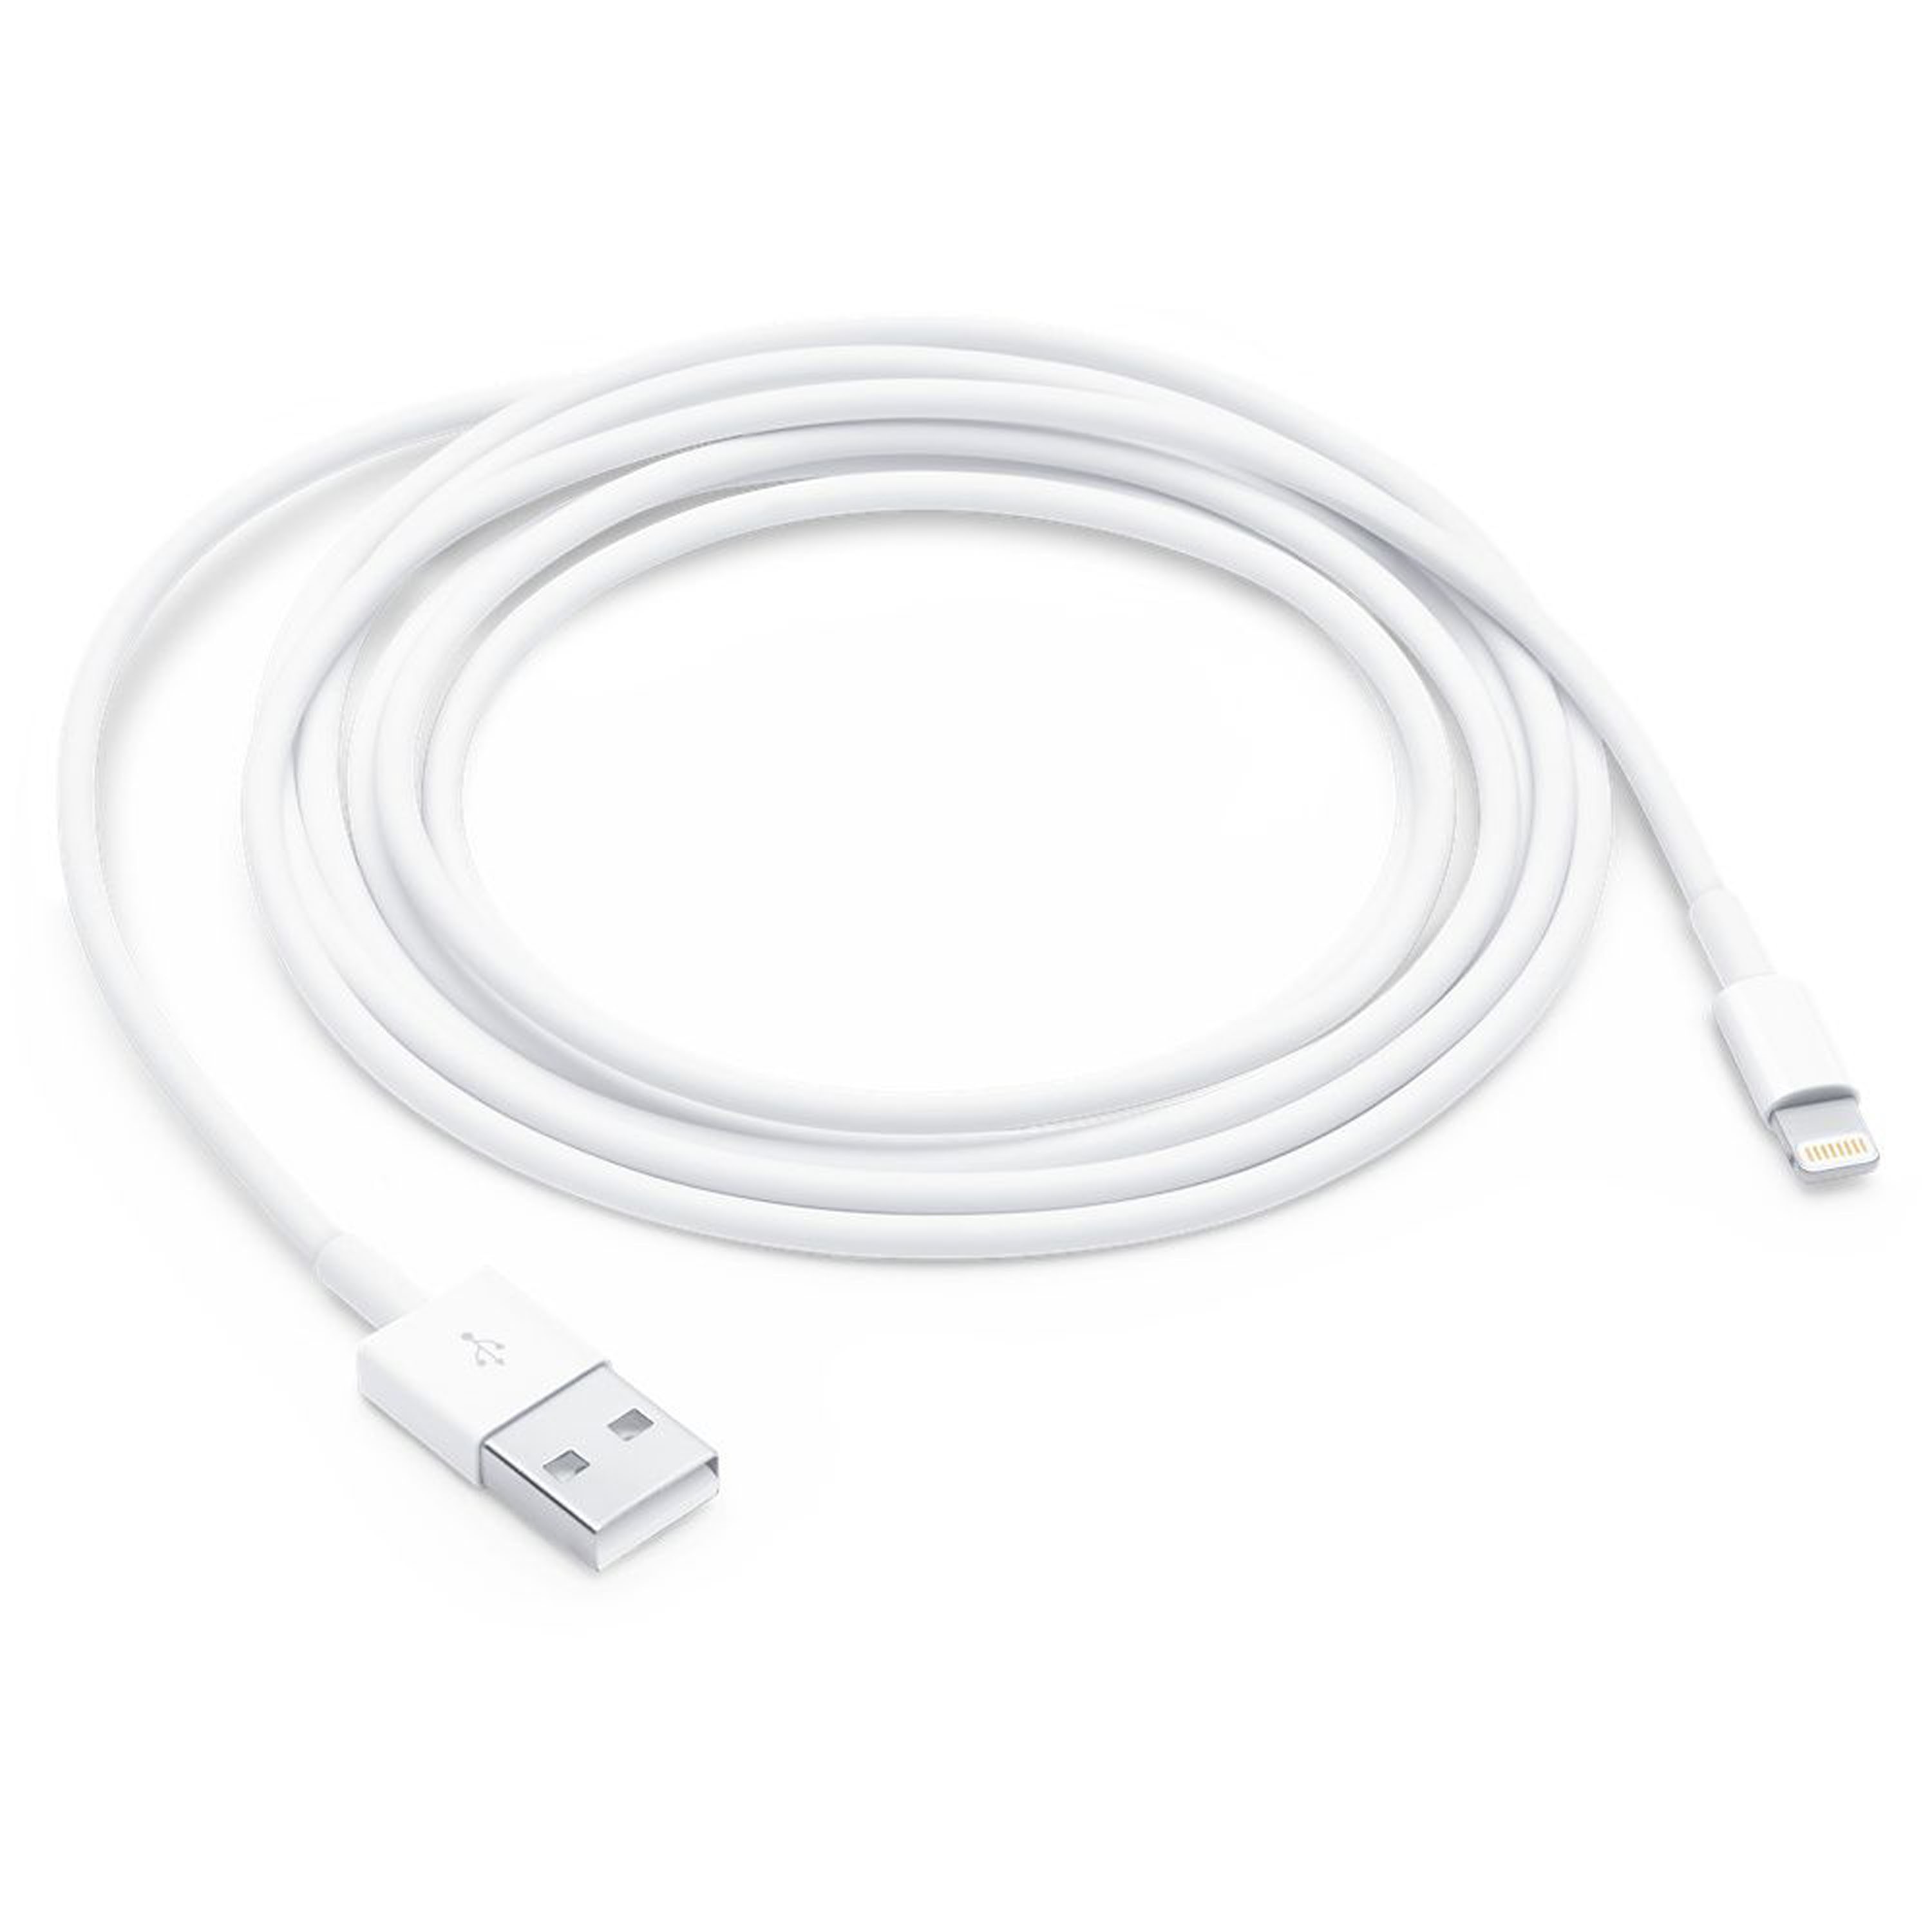 Estallar Astrolabio Opaco Apple Lightning USB Cable 2M in the USB Cables department at Lowes.com